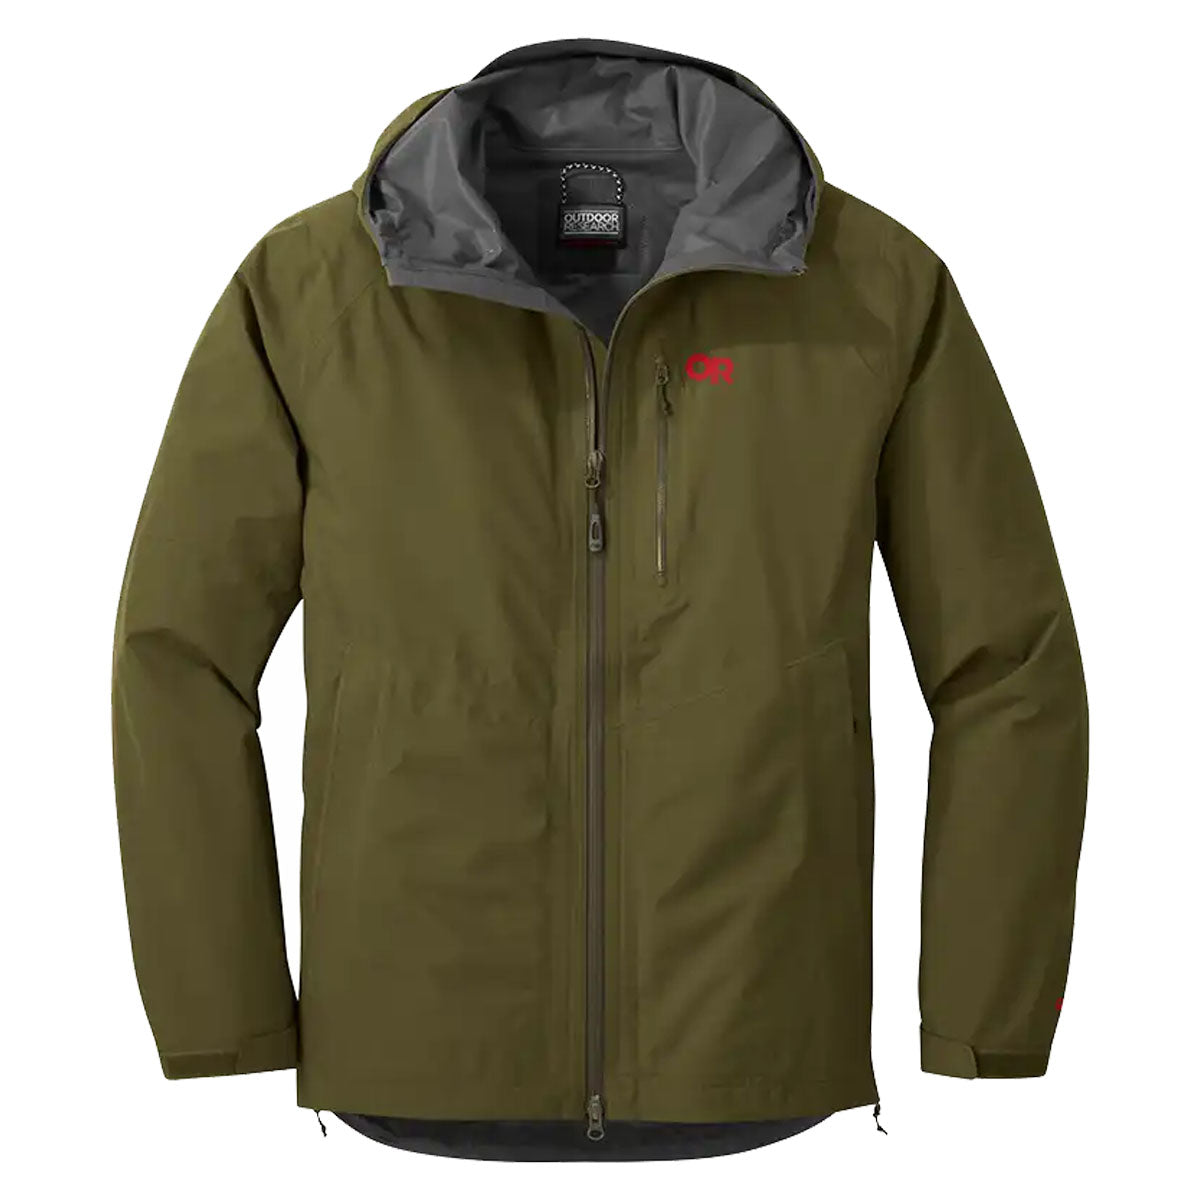 Outdoor Research Men’s Foray Jacket